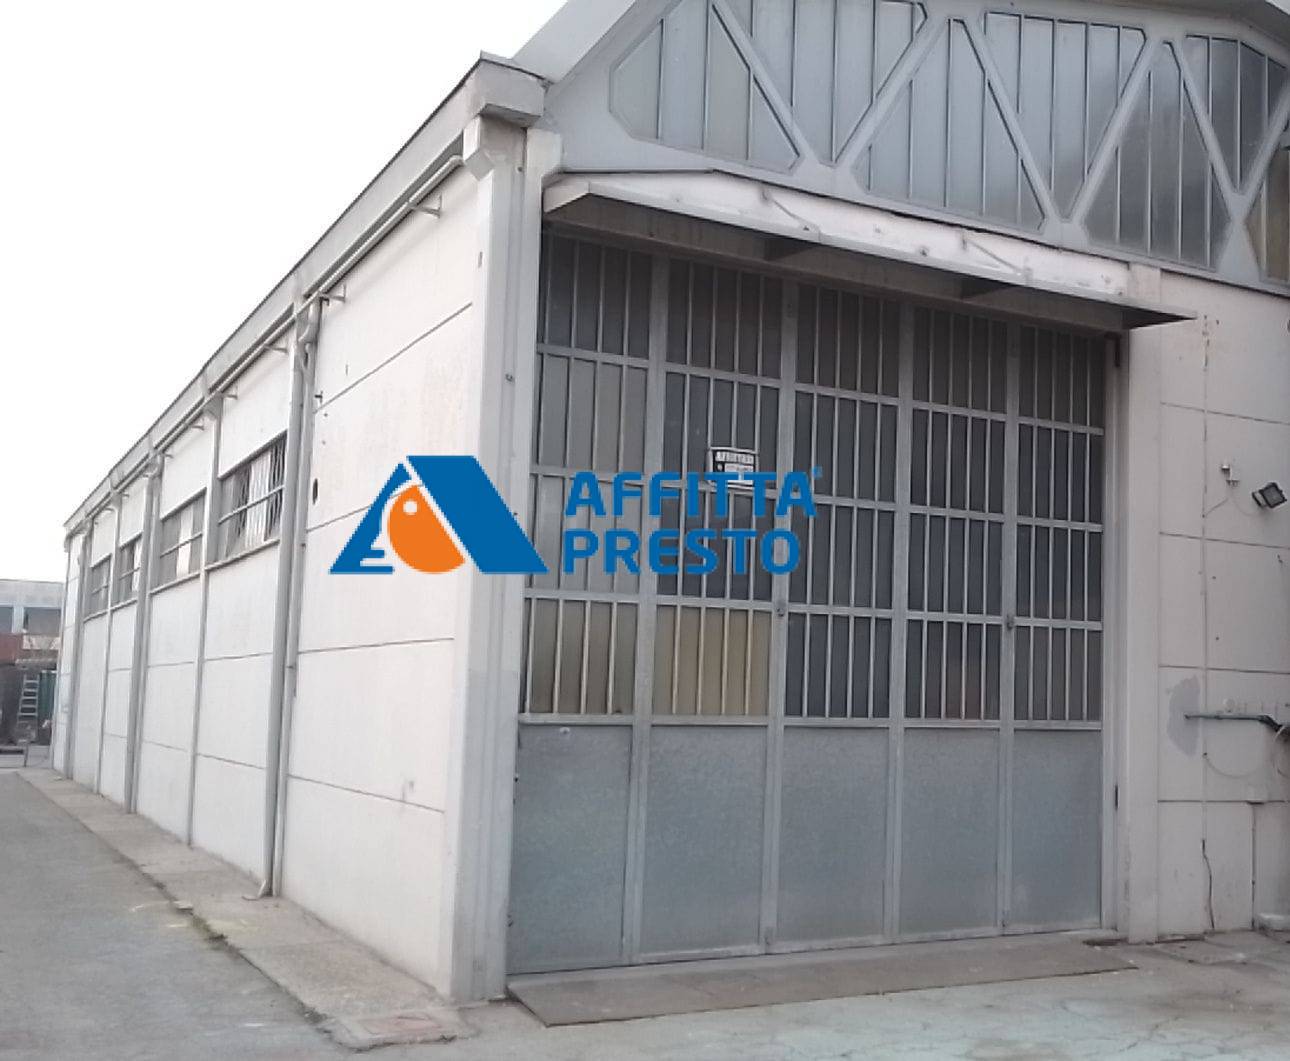 Attivit commerciale in affitto/gestione a Ravenna